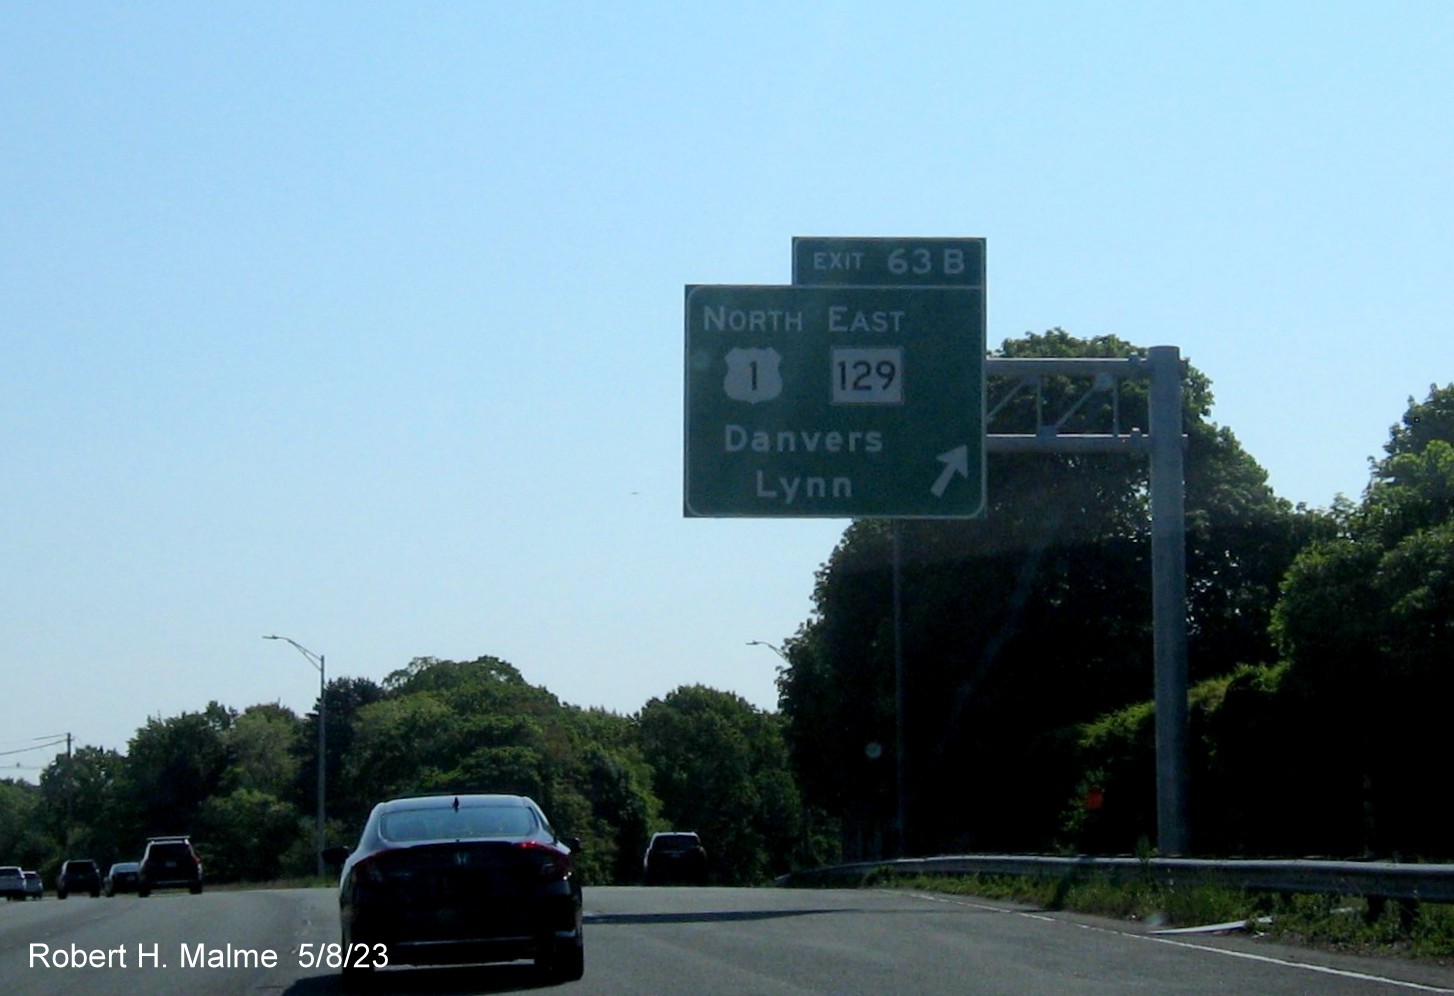 Image of recently placed overhead ramp sign for the US 1 North MA 129 East exit on I-95/MA 128 North in Lynnfield, May 2023